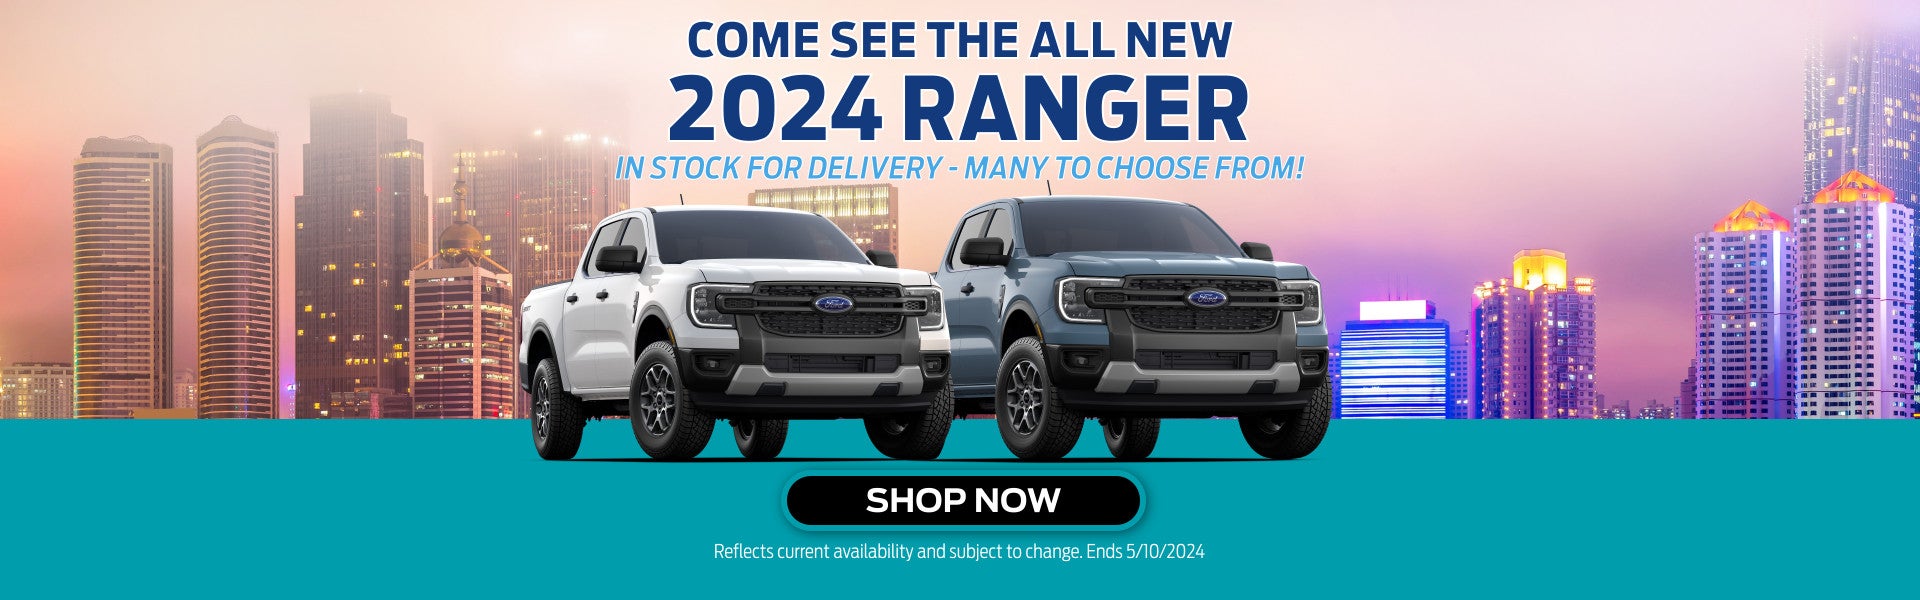 The New 2024 Ranger, Shop Now